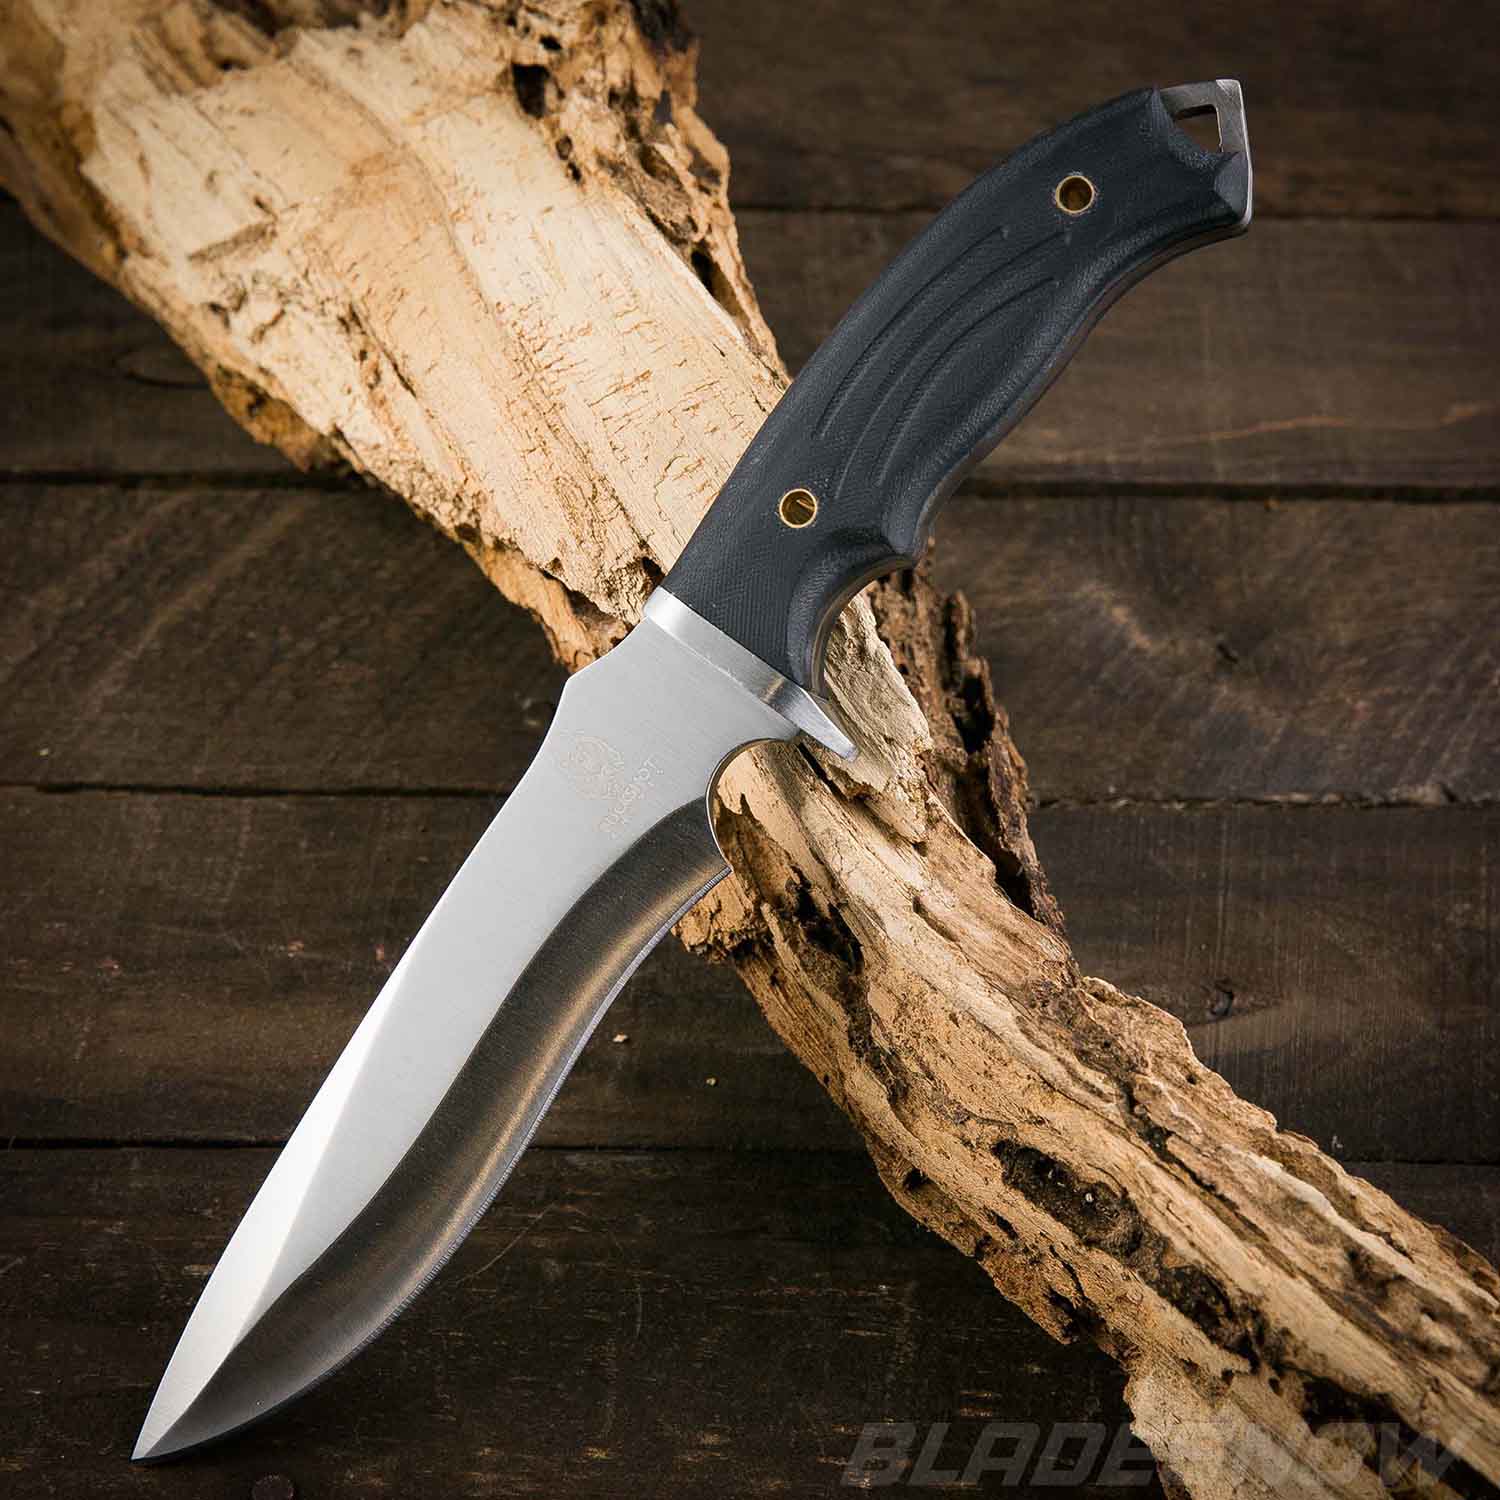 View All Products 2 & - Swords Now | Knives Blades